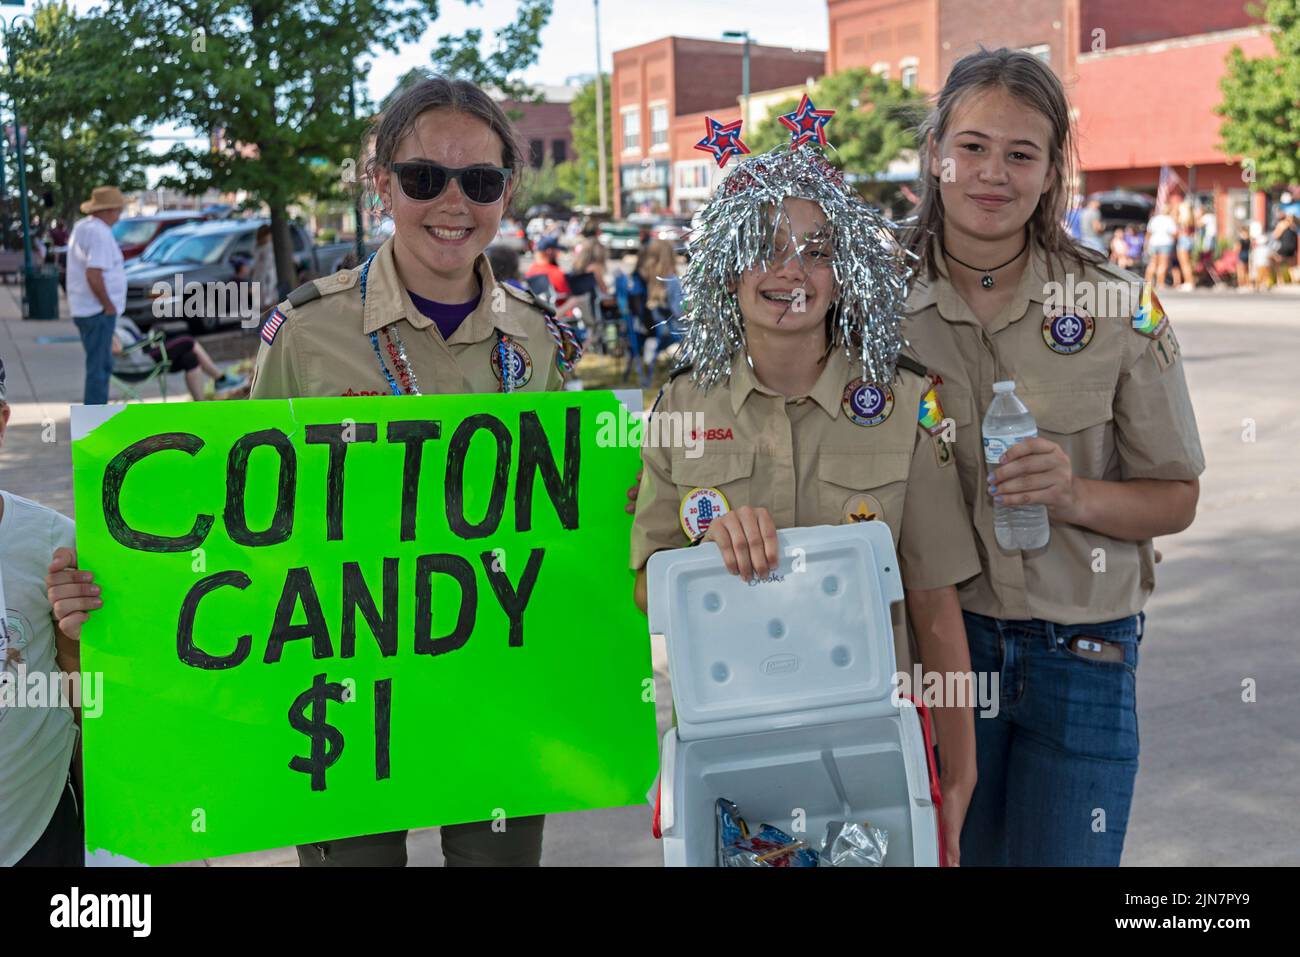 Hutchinson, Kansas - Boy Scouts sell cotton candy at the annual July 4 'Patriots Parade' in rural Kansas. Stock Photo